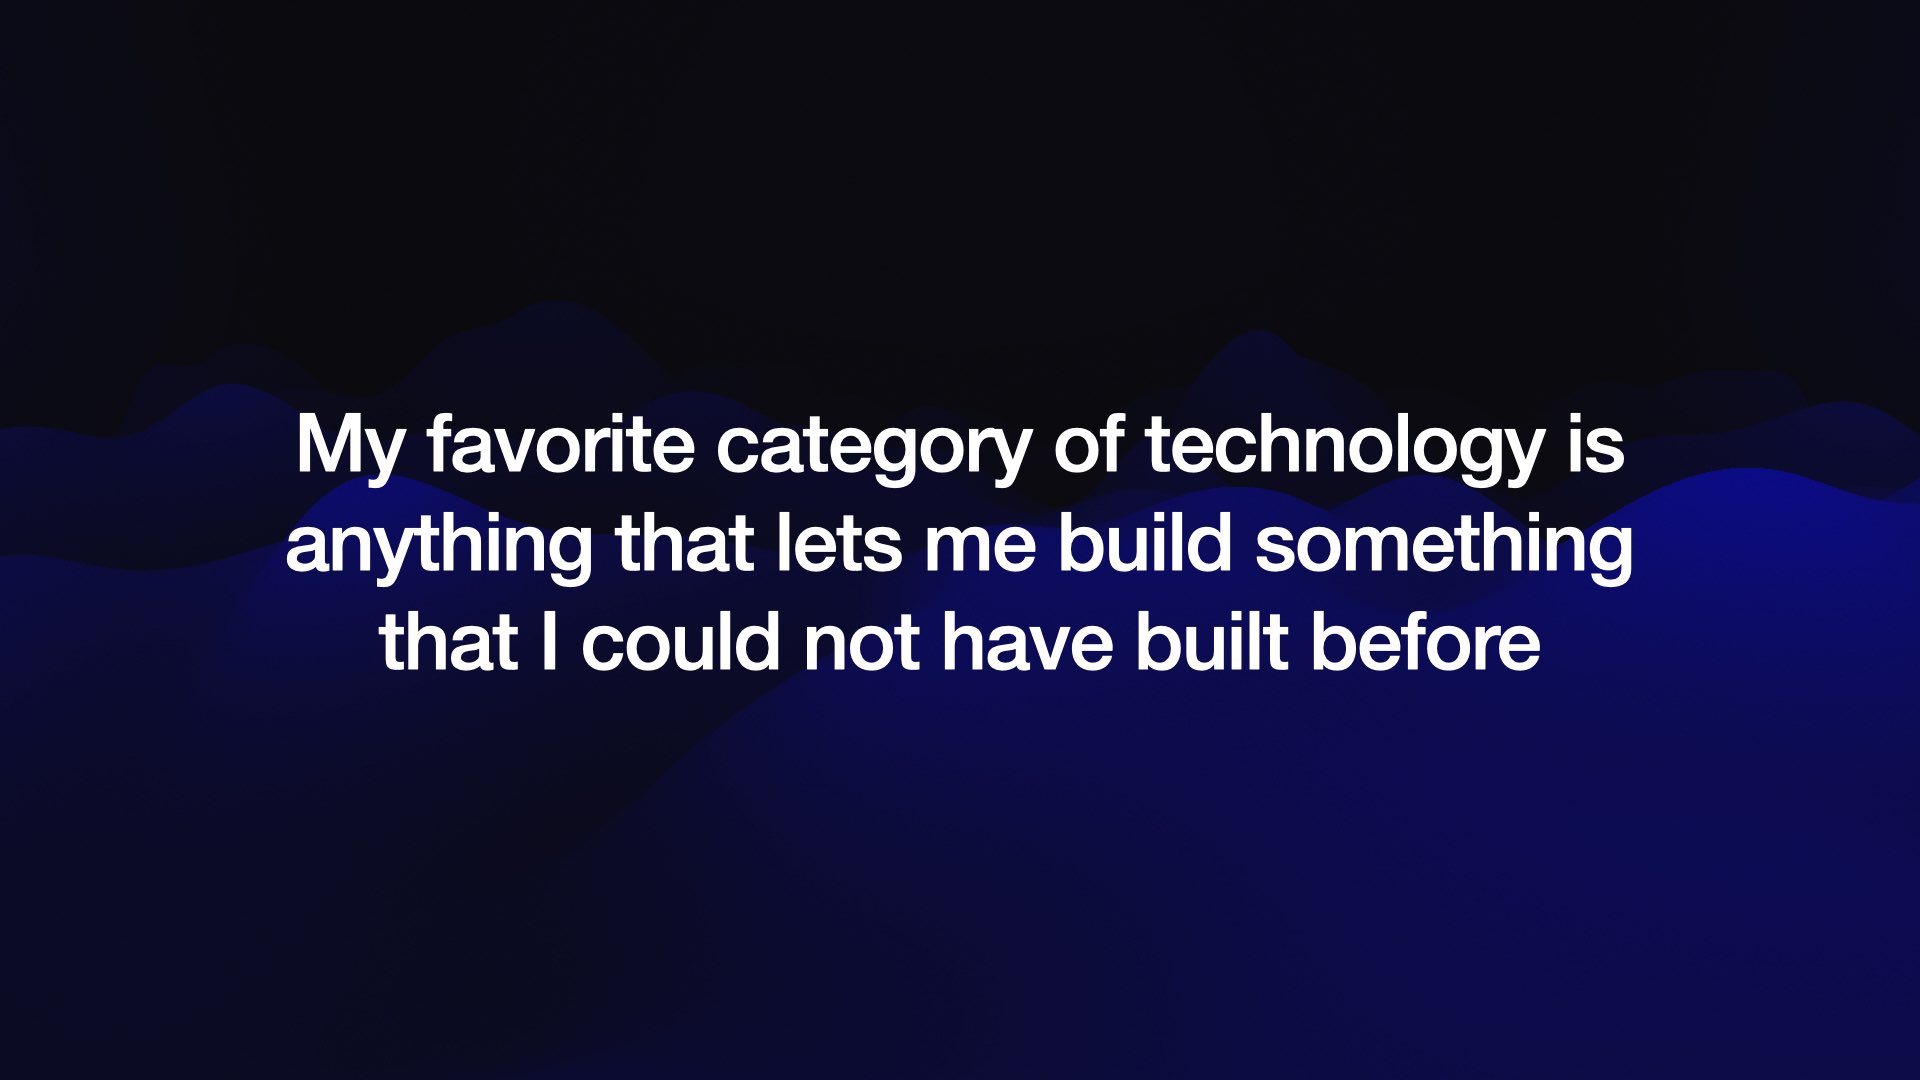 My favorite category of technology is anything that lets me build something that I could not have built before 